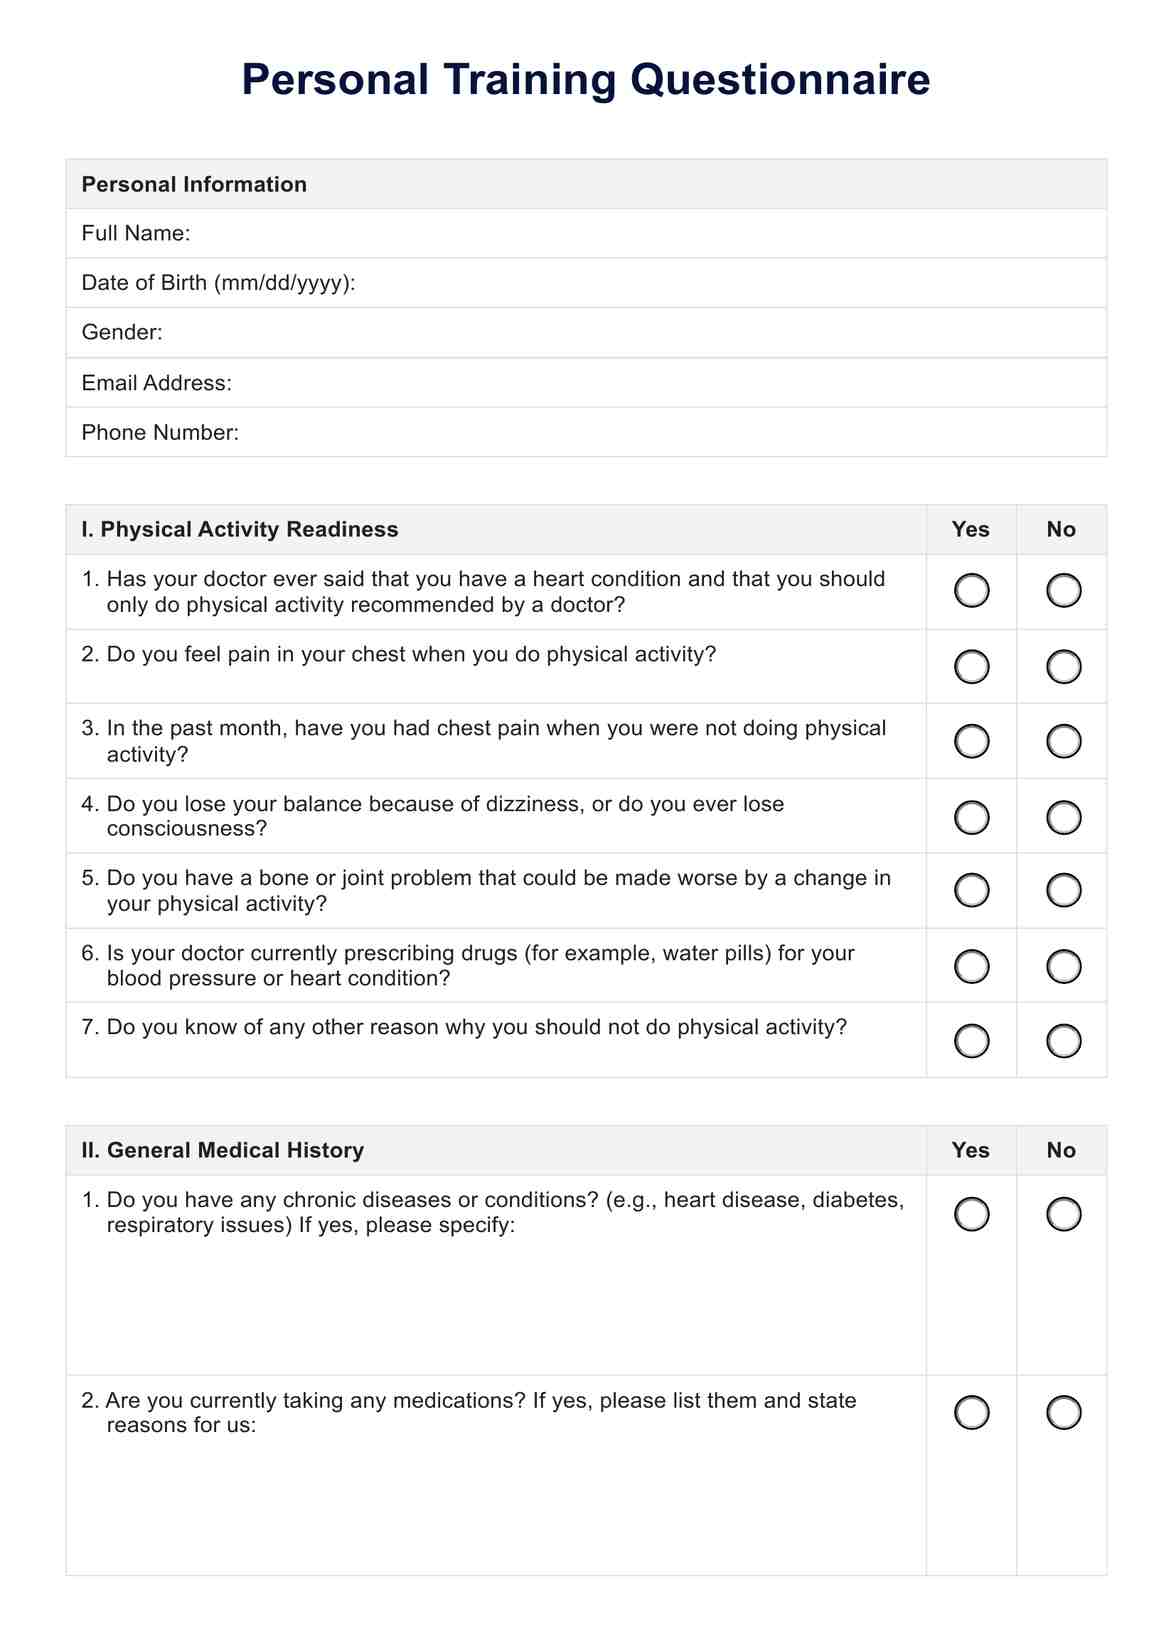 Personal Training Questionnaire PDF Example